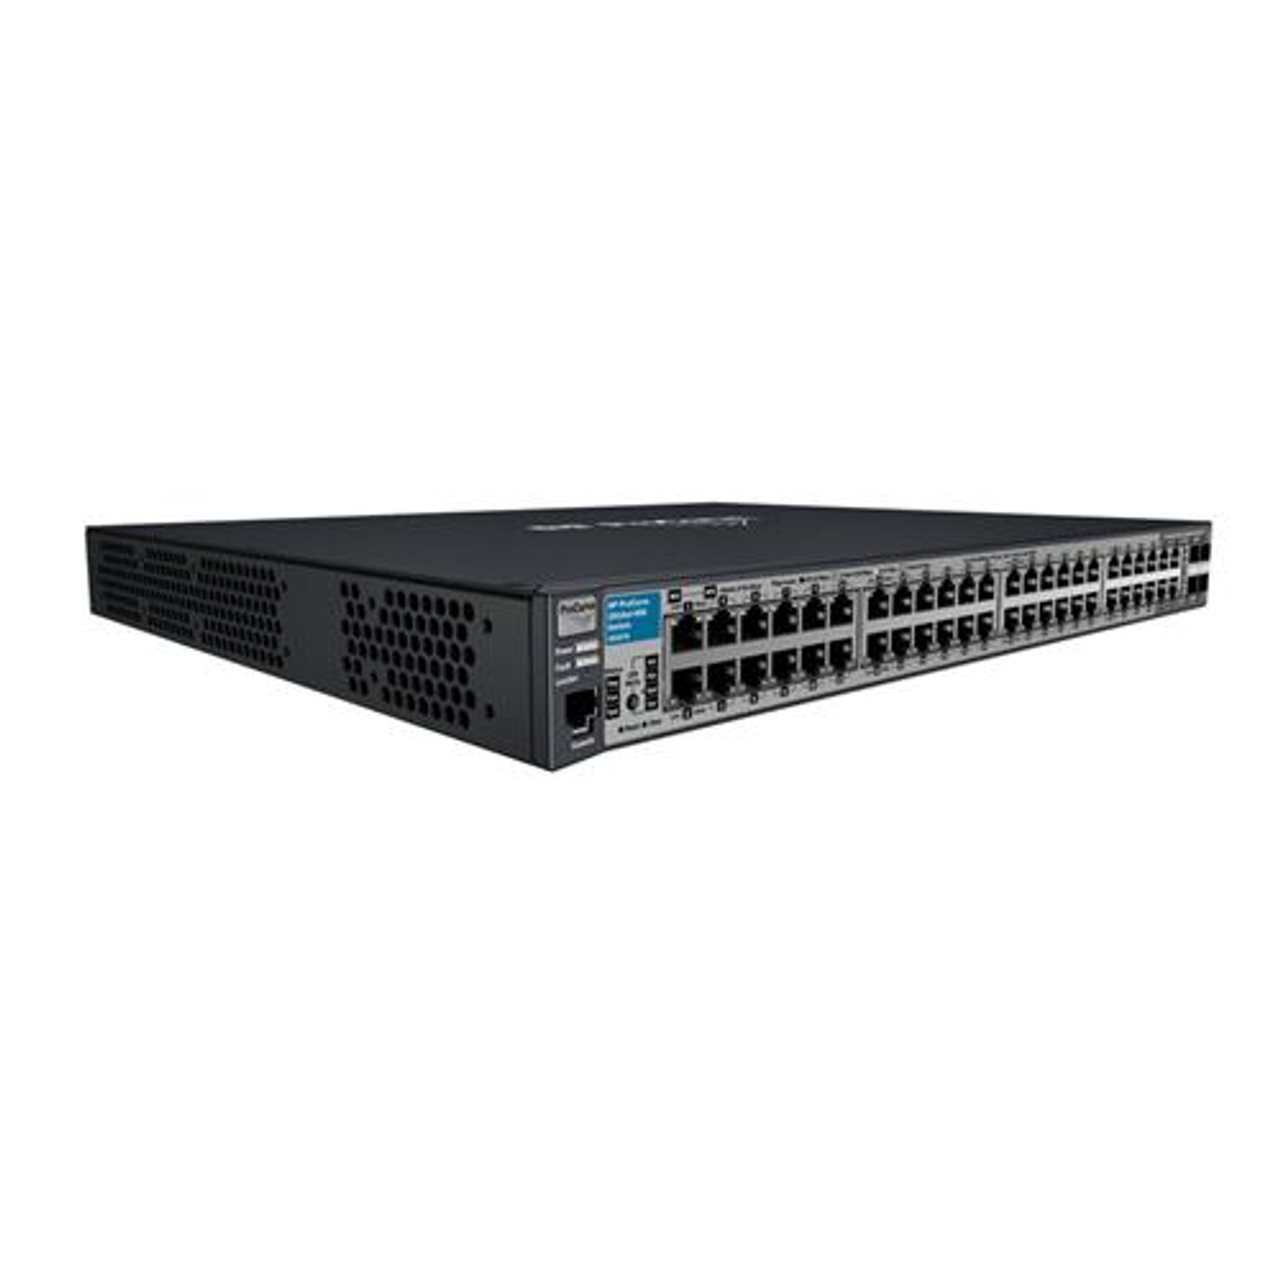 J9147A#ABB HP ProCurve E2910al-48G 48-Ports Layer-2 Managed Stackable Gigabit Ethernet Switch with 4 x SFP (mini-GBIC) (Refurbished)